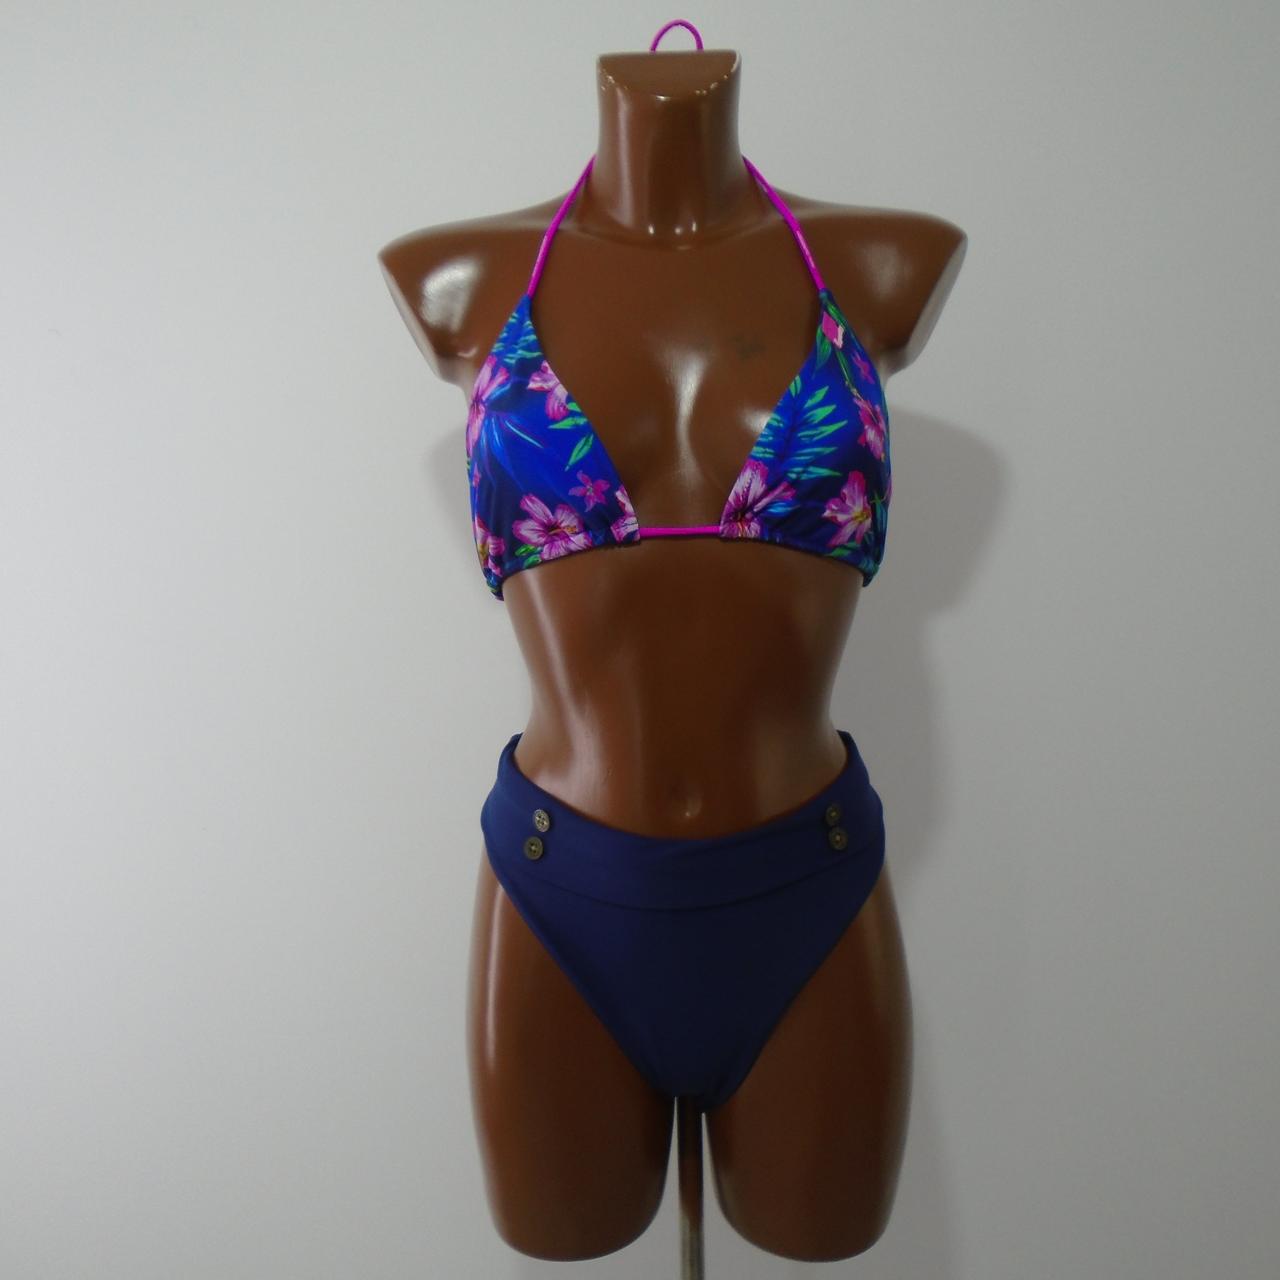 Women's Swimsuit Superdry. Multicolor. XL. Used. Good